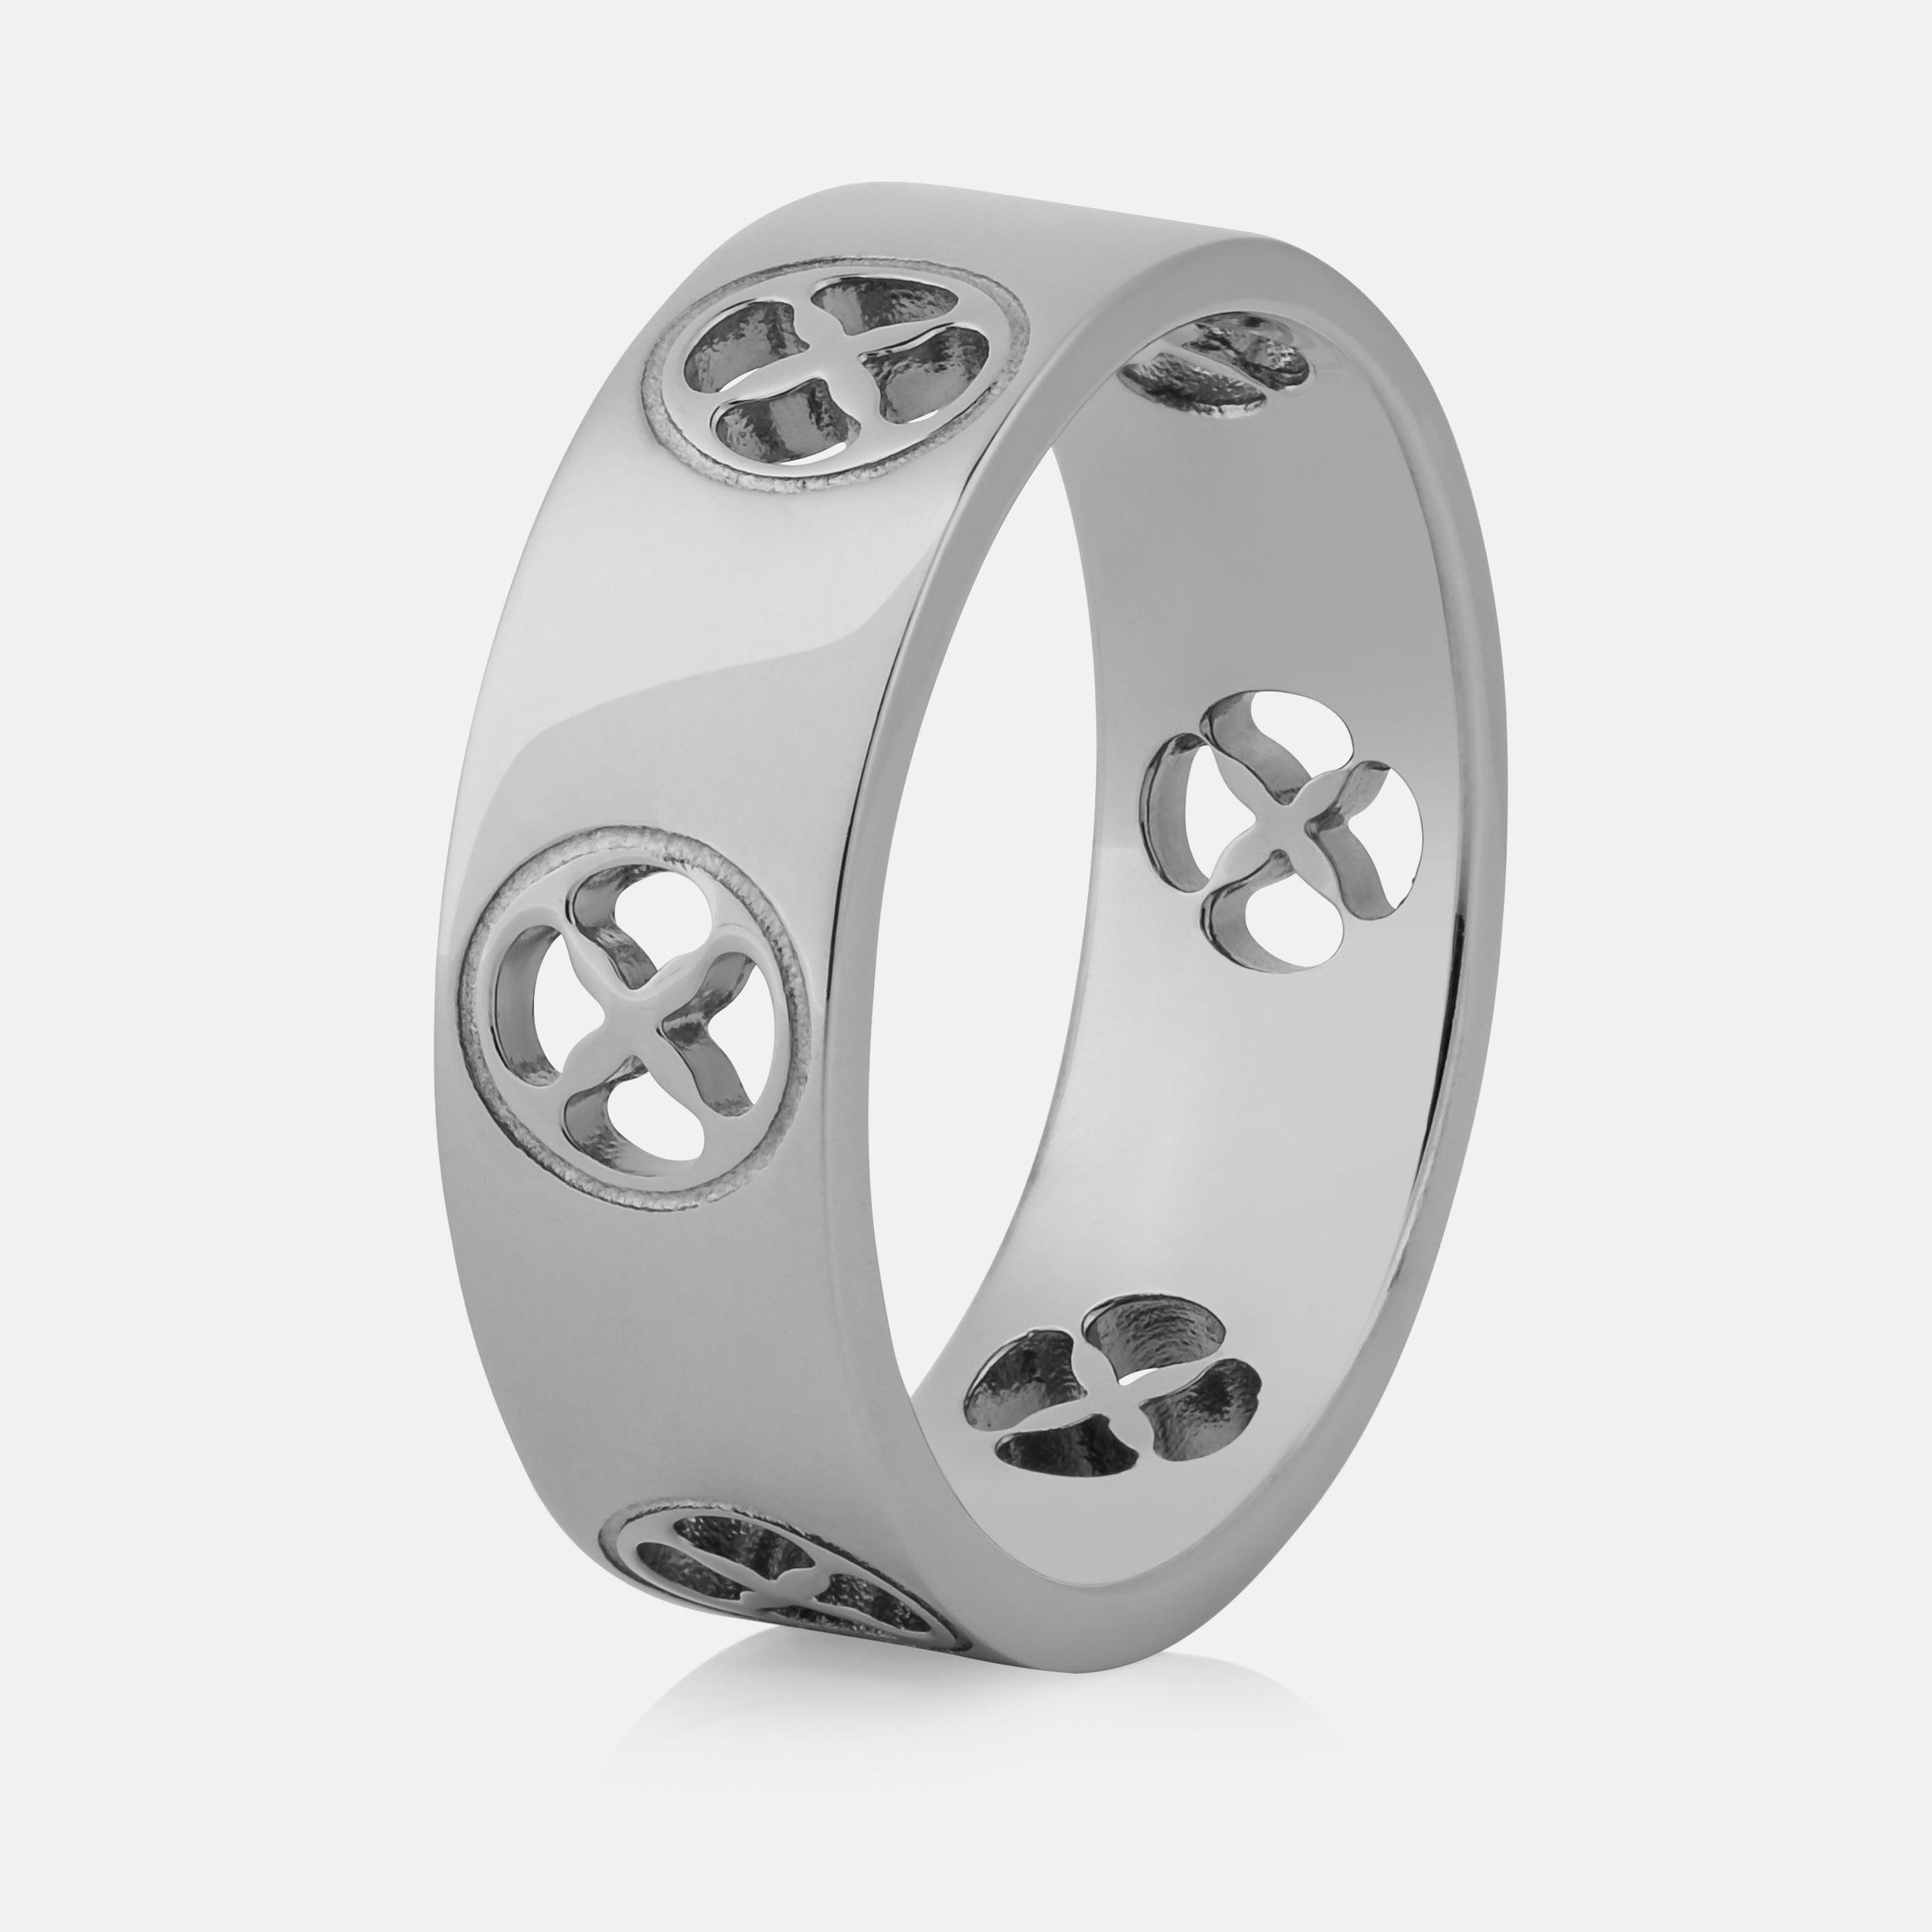 Top Quality Titainum steel Silver Men's LV Rings